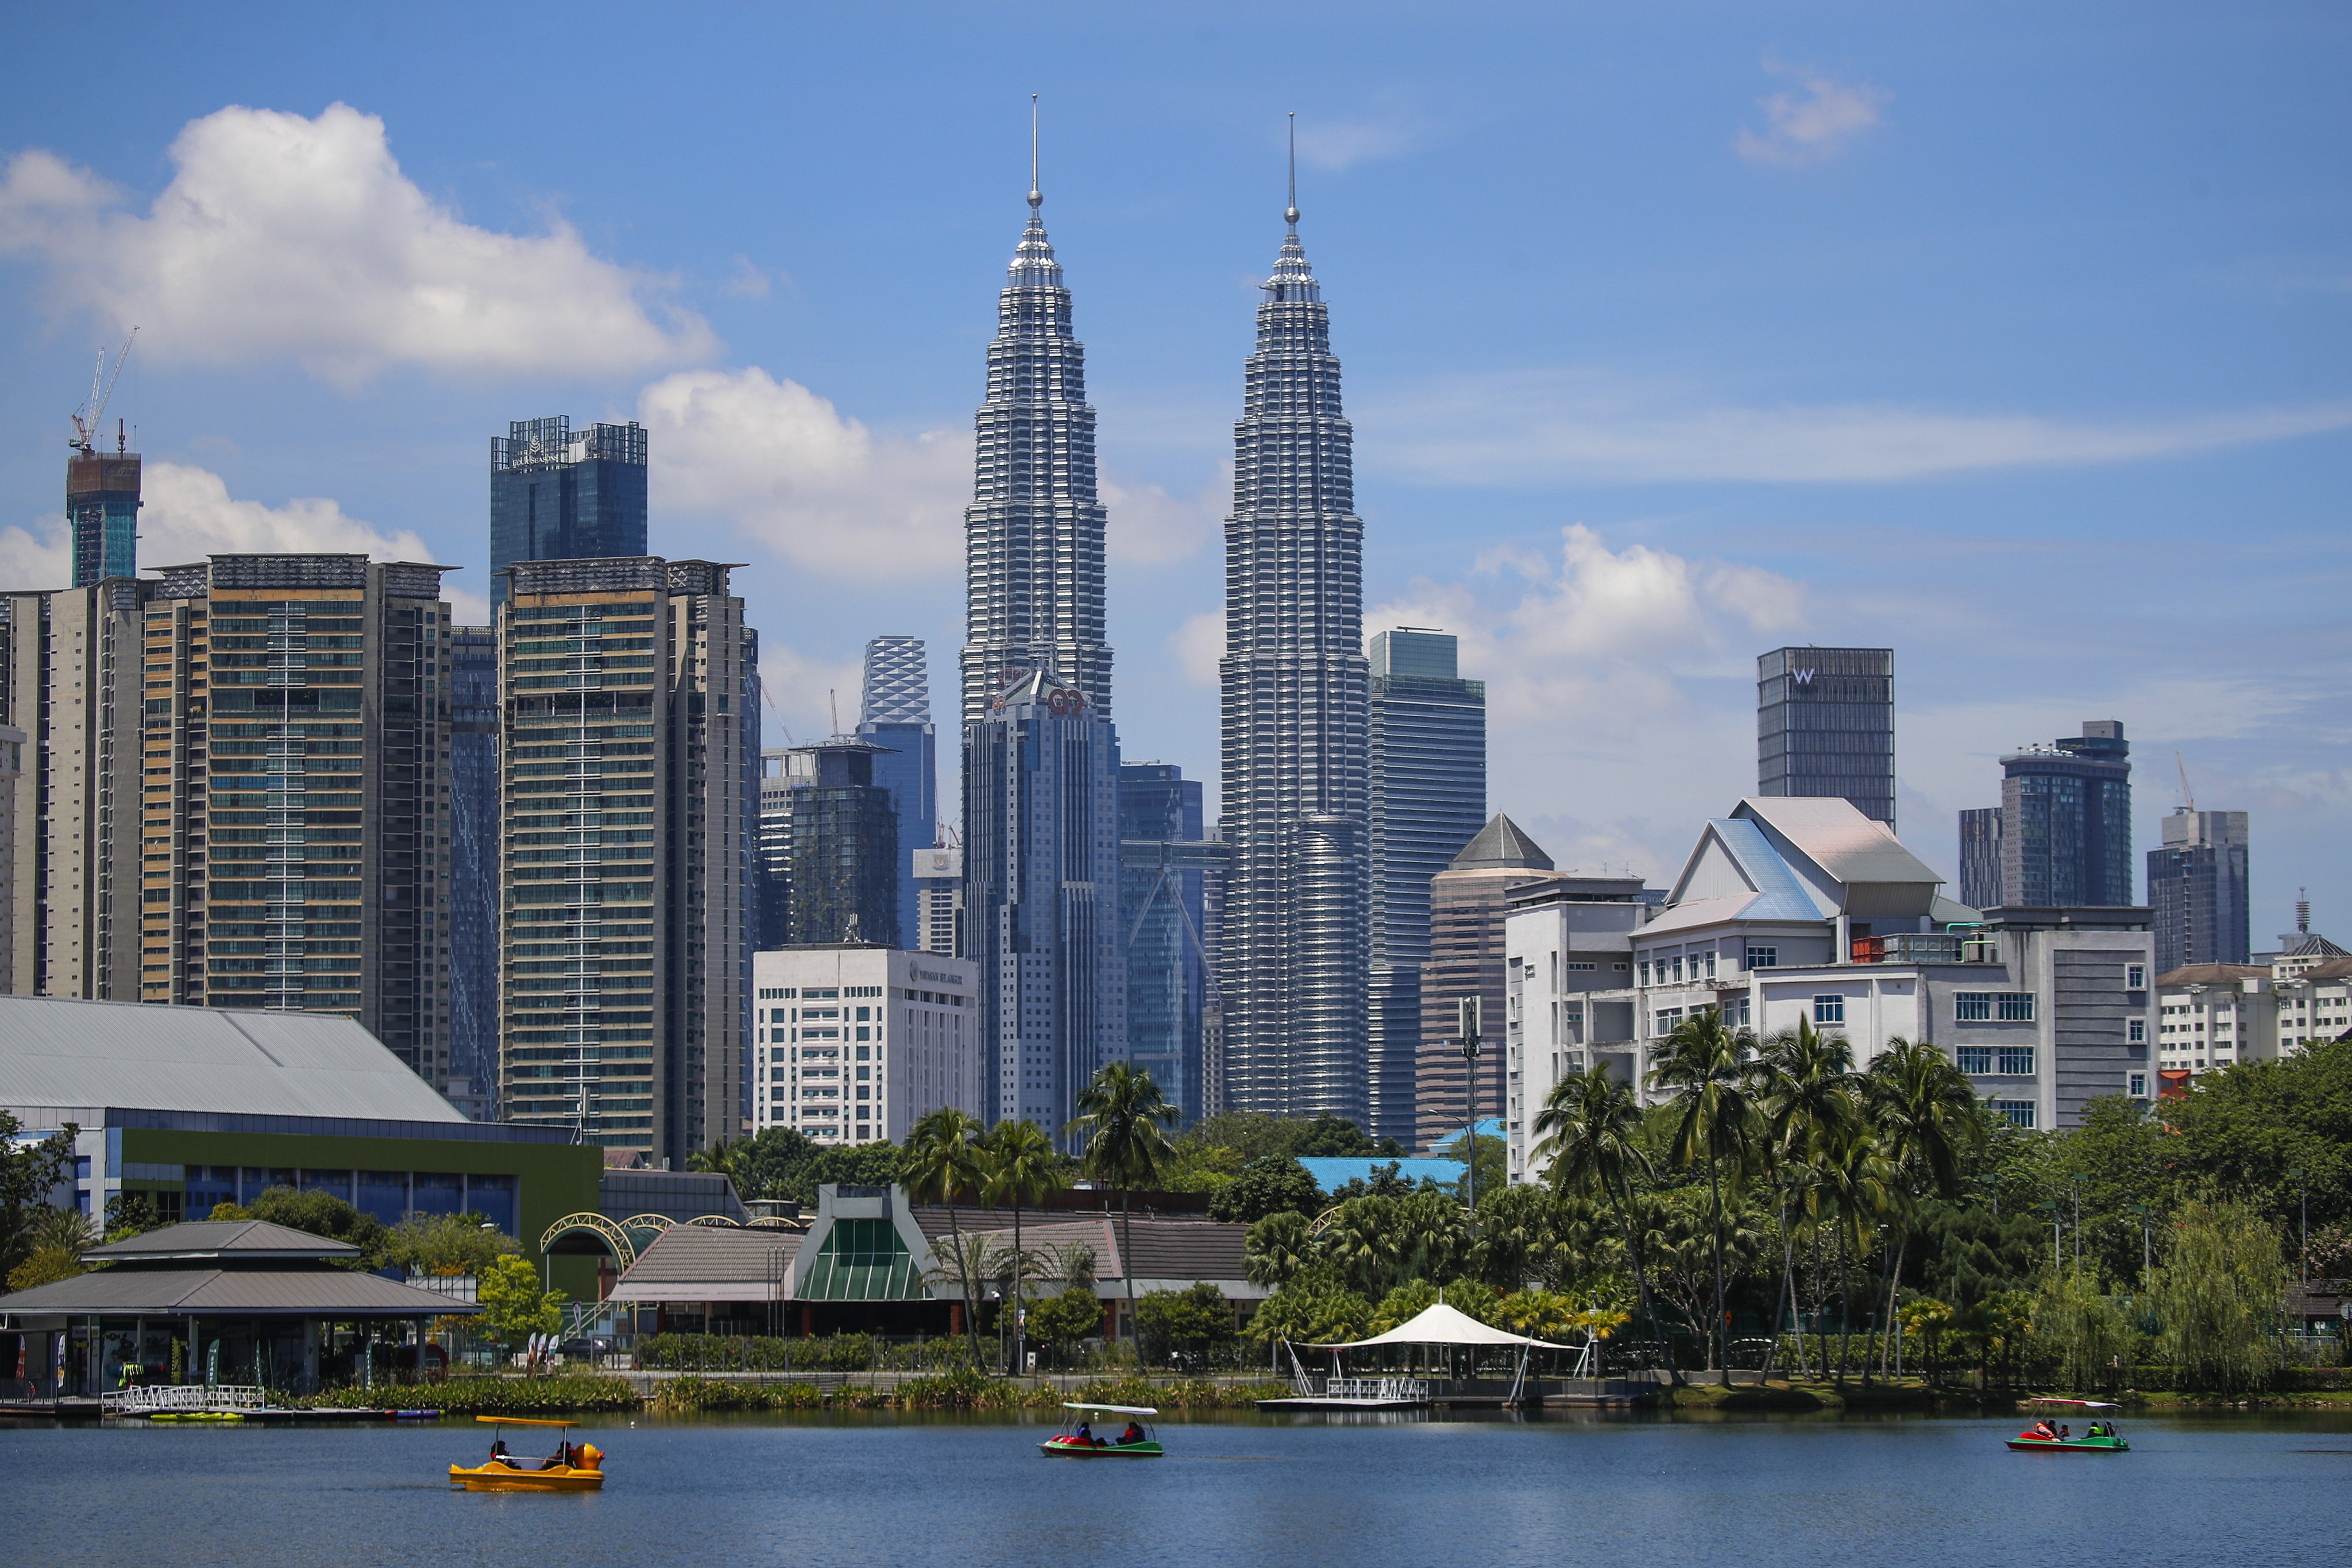 The Petronas Twin Towers in Kuala Lumpur. Foreign direct investments were a key driver behind Malaysia’s period of explosive growth between the 1980s and 1990s. Photo: EPA-EFE